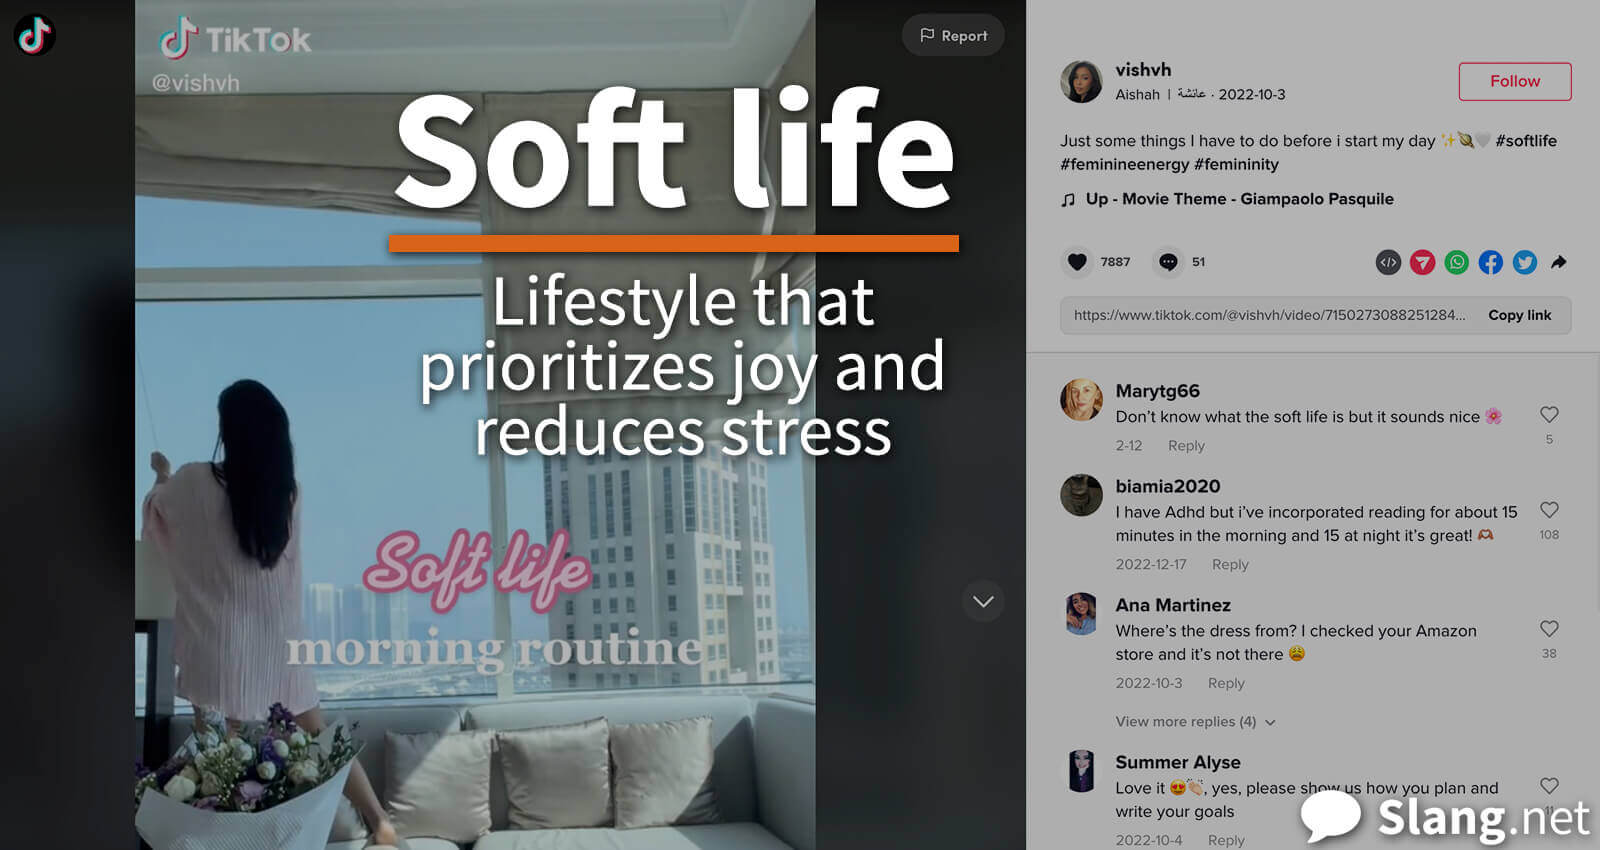 People love to share their soft life tips on social media, including TikTok